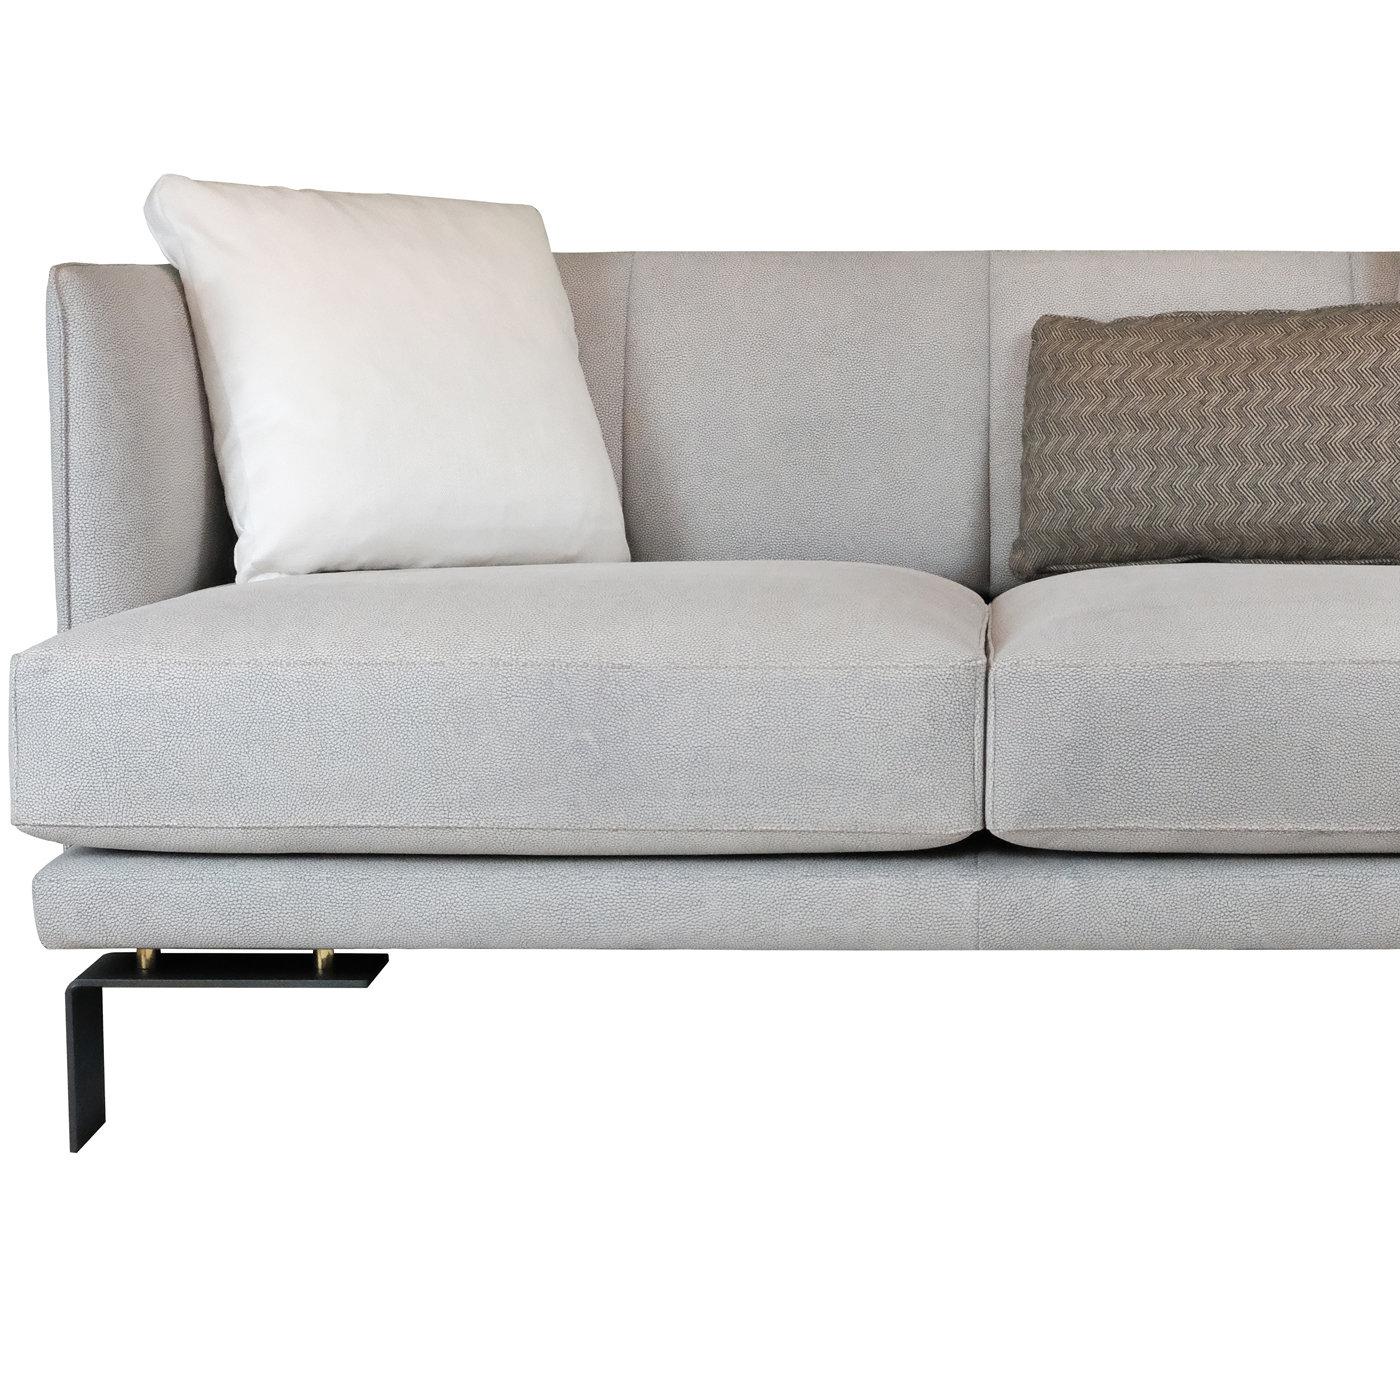 Boasting a unique, contemporary silhouette, this sofa will be a stunning addition to any interior. Its embracing silhouette is superbly mounted on charcoal gray metal feet enriched with golden details and rests on a wooden frame equipped with